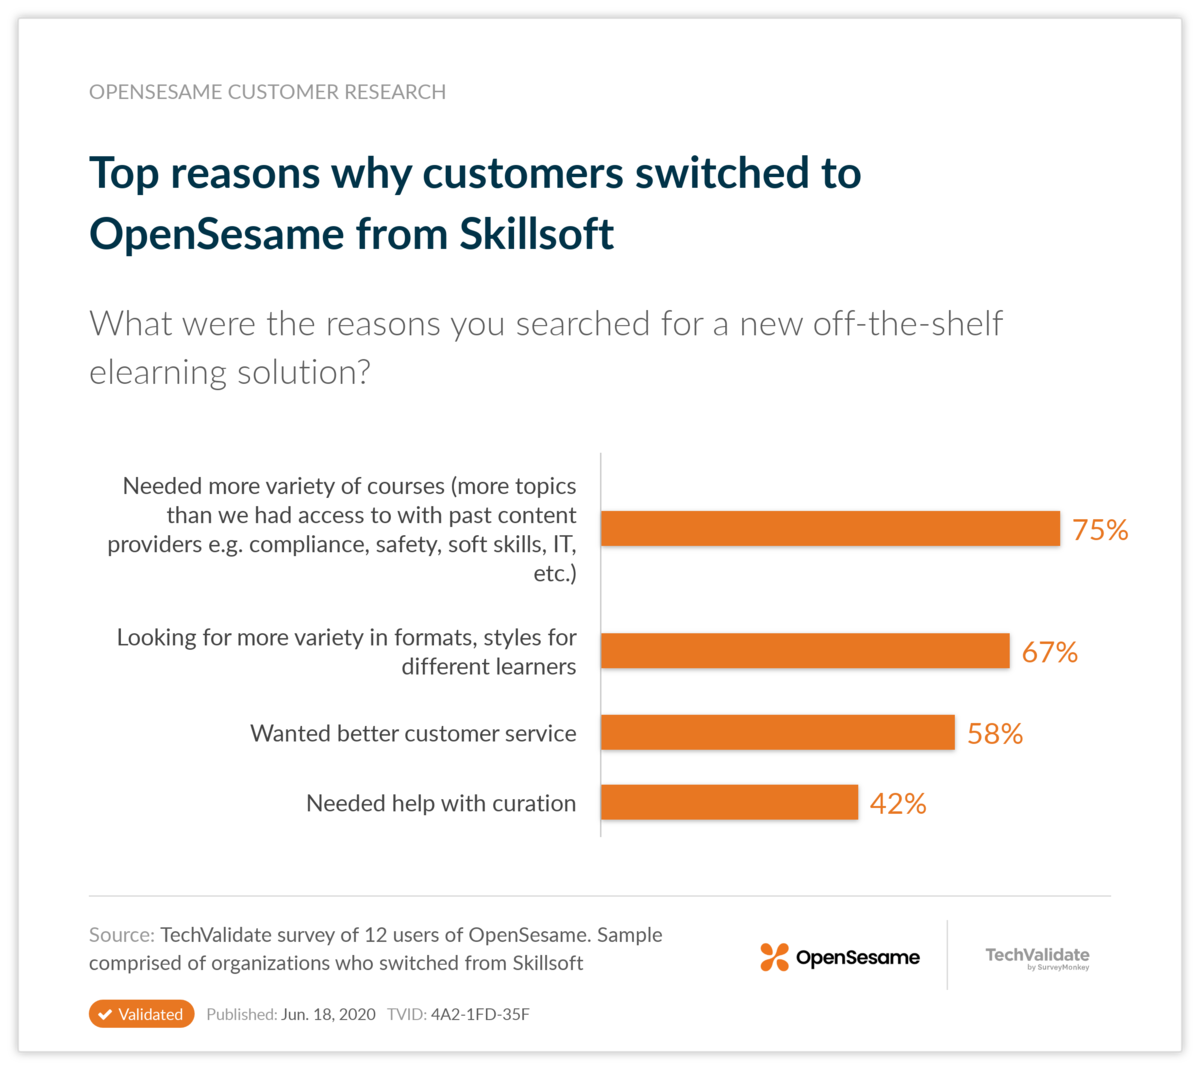 Top reasons why customers switched to OpenSesame from Skillsoft